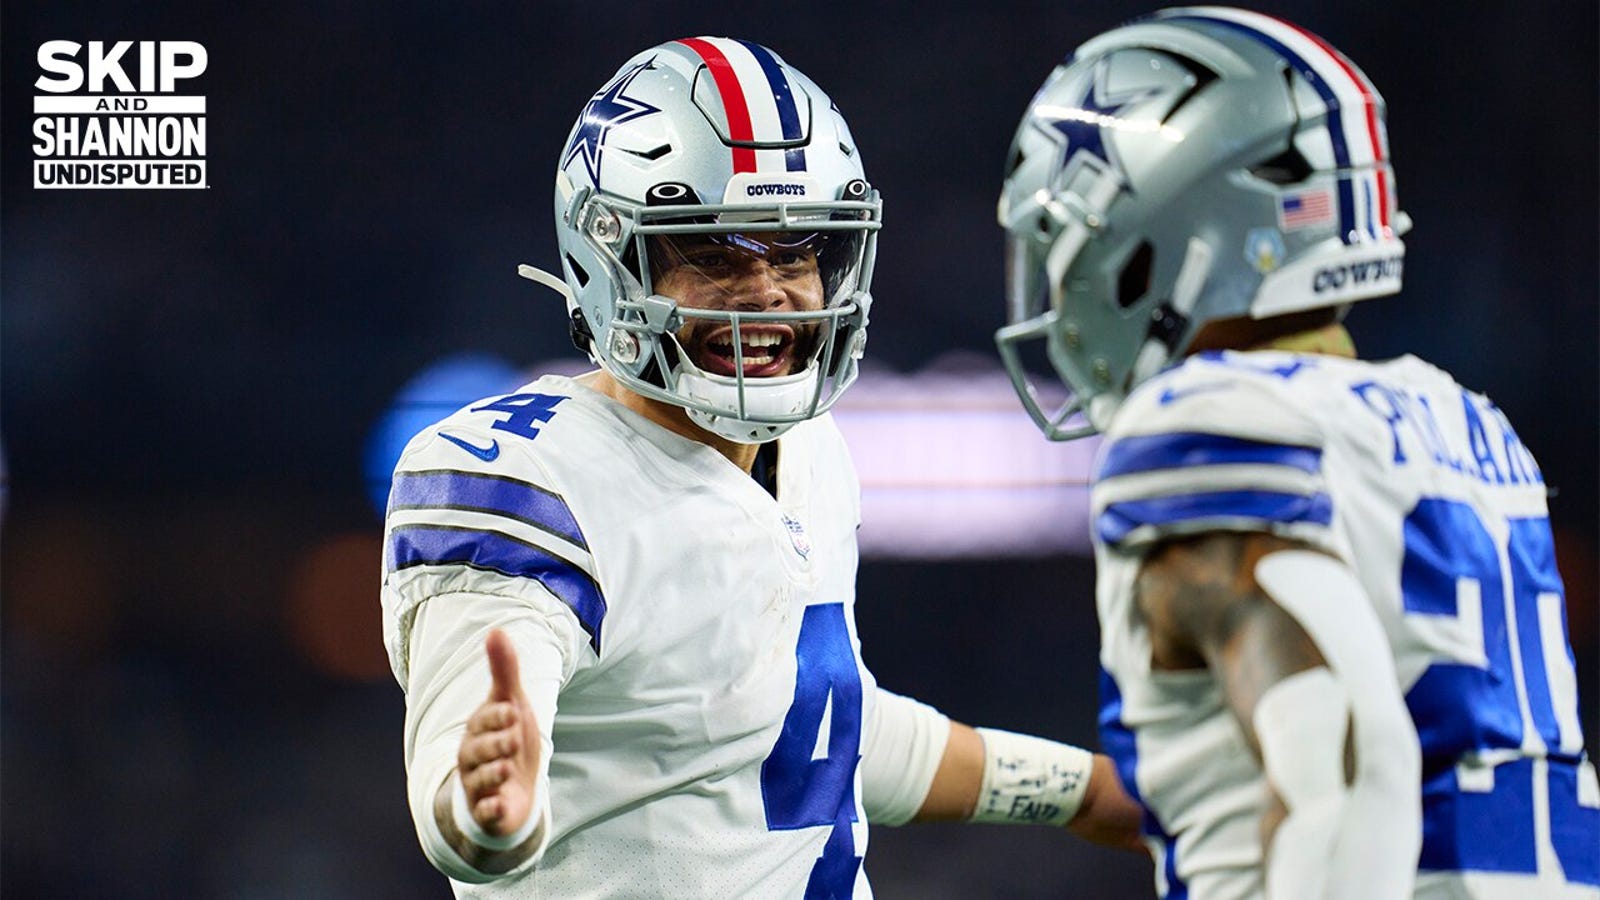 Latest predictions give Cowboys 29% chance of winning Super Bowl